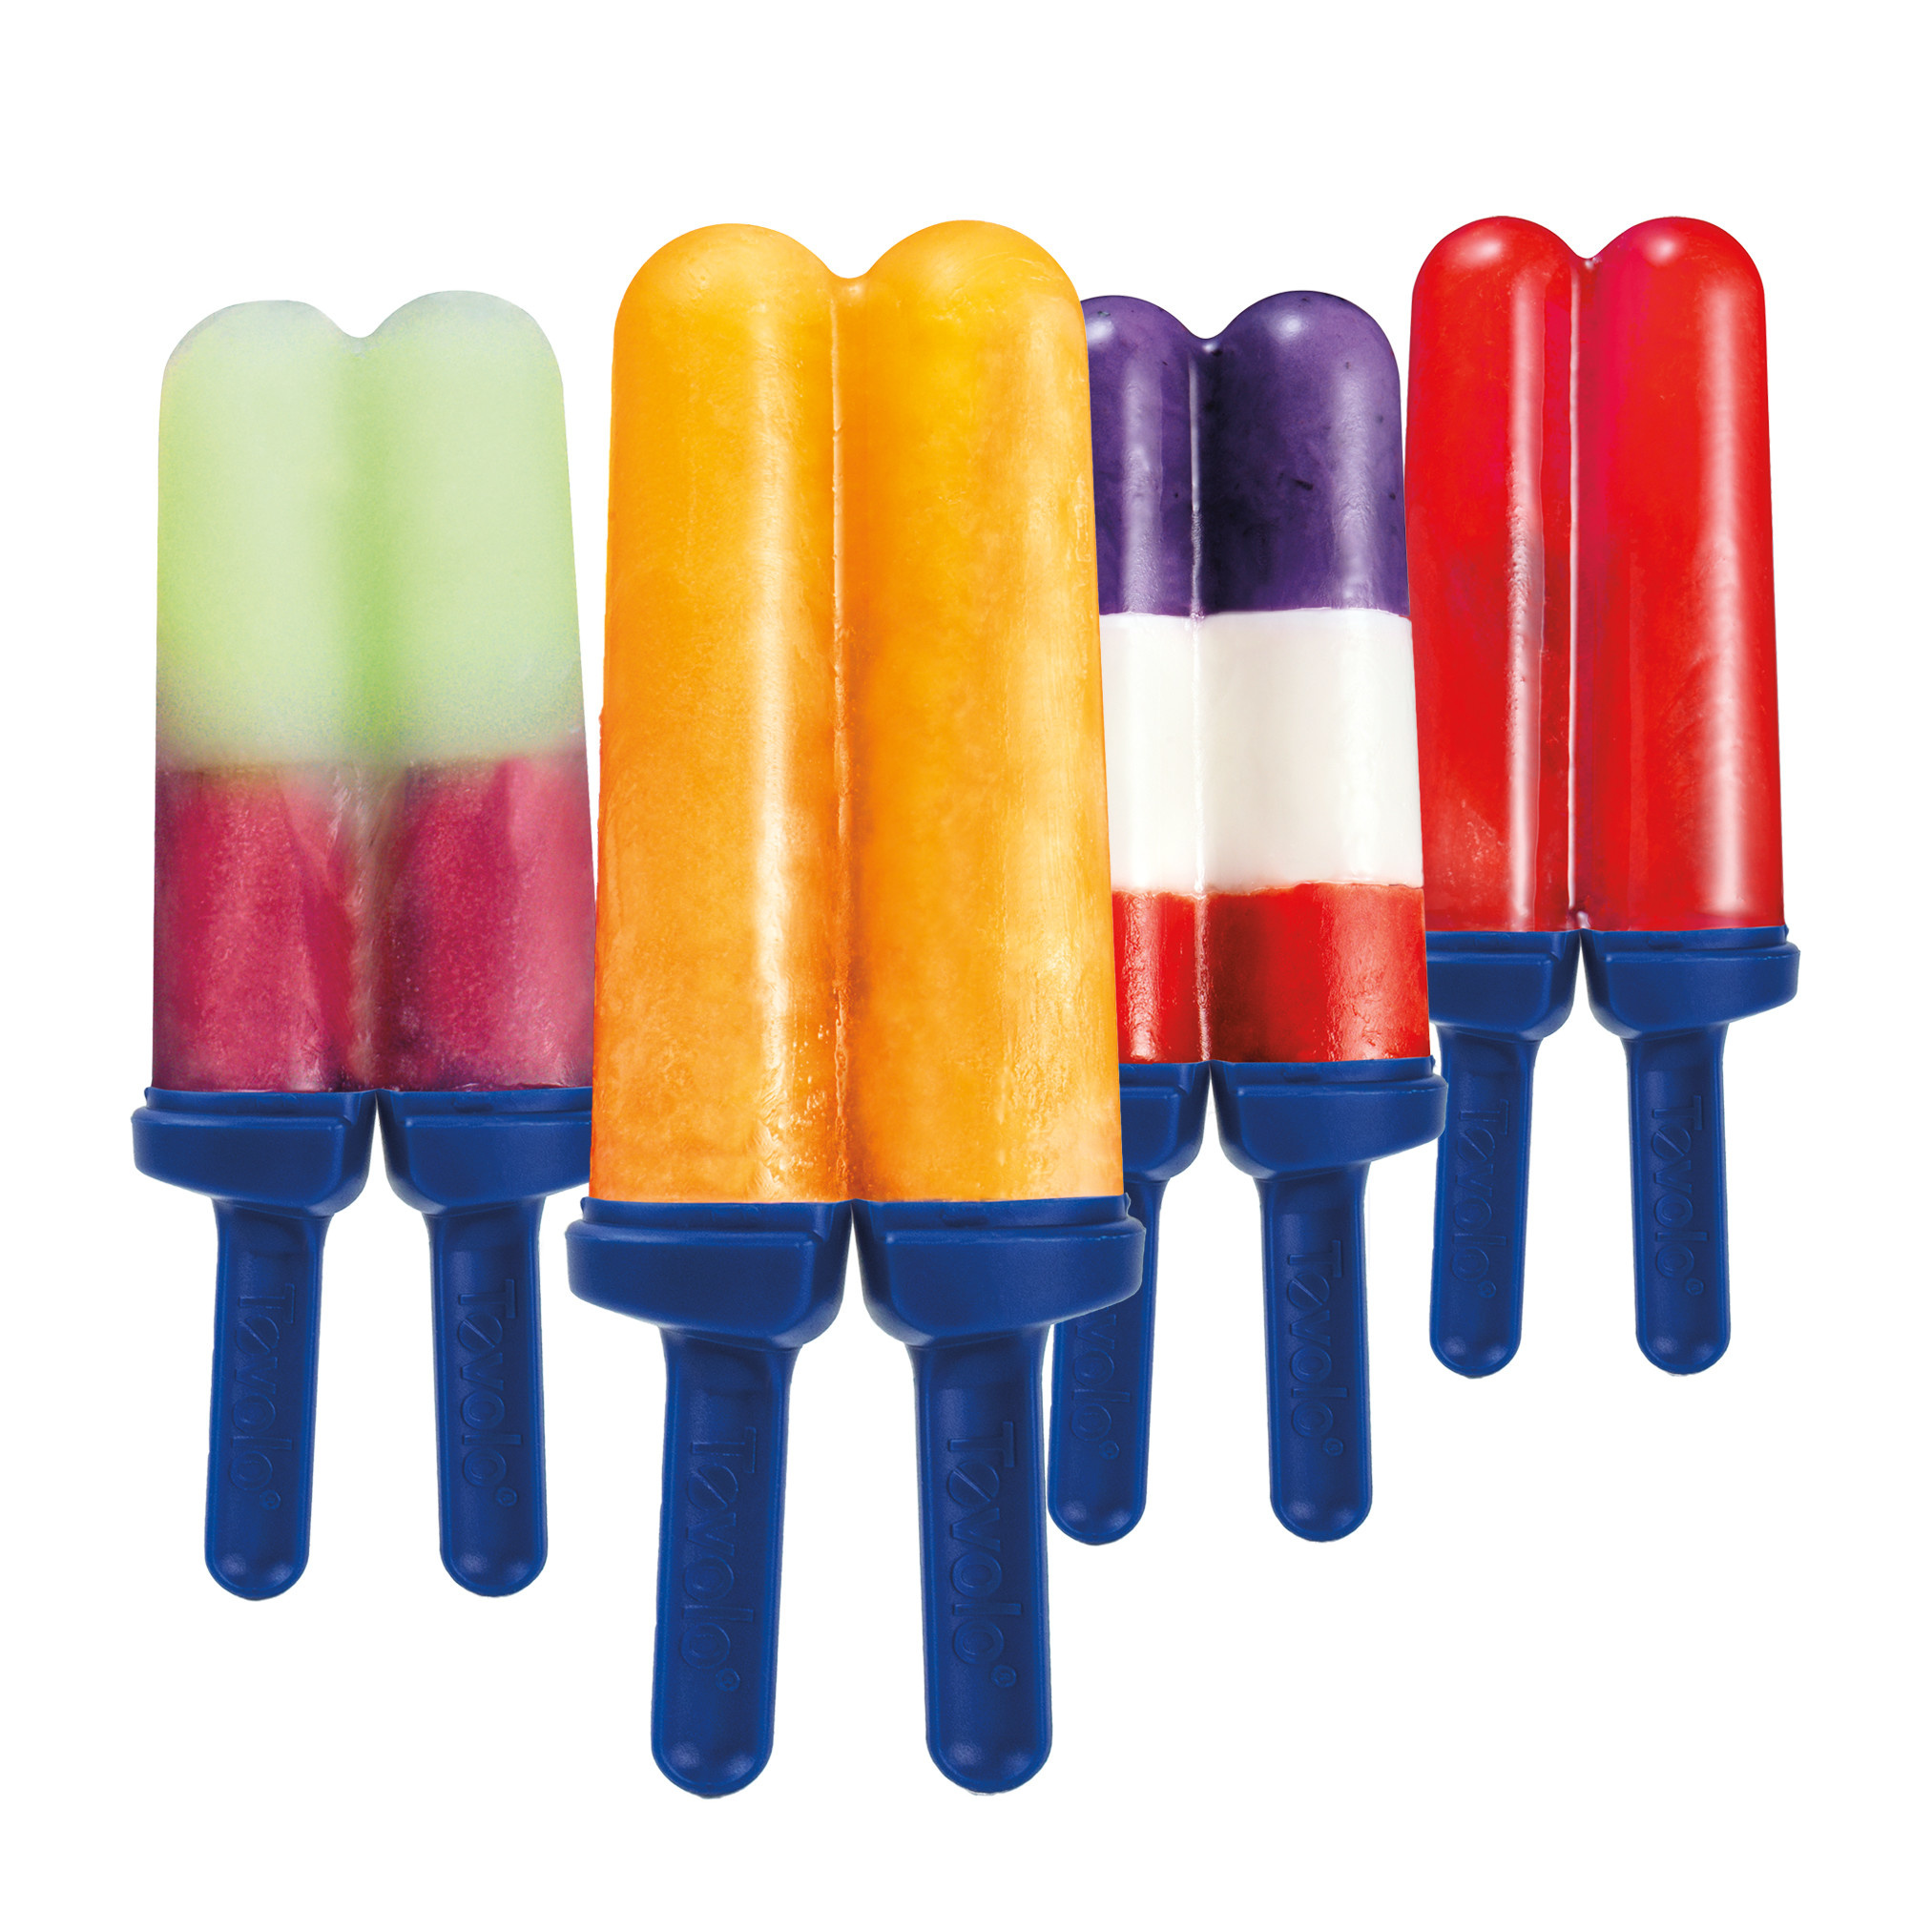 Norpro Traditional Popsicle Mold - Whisk